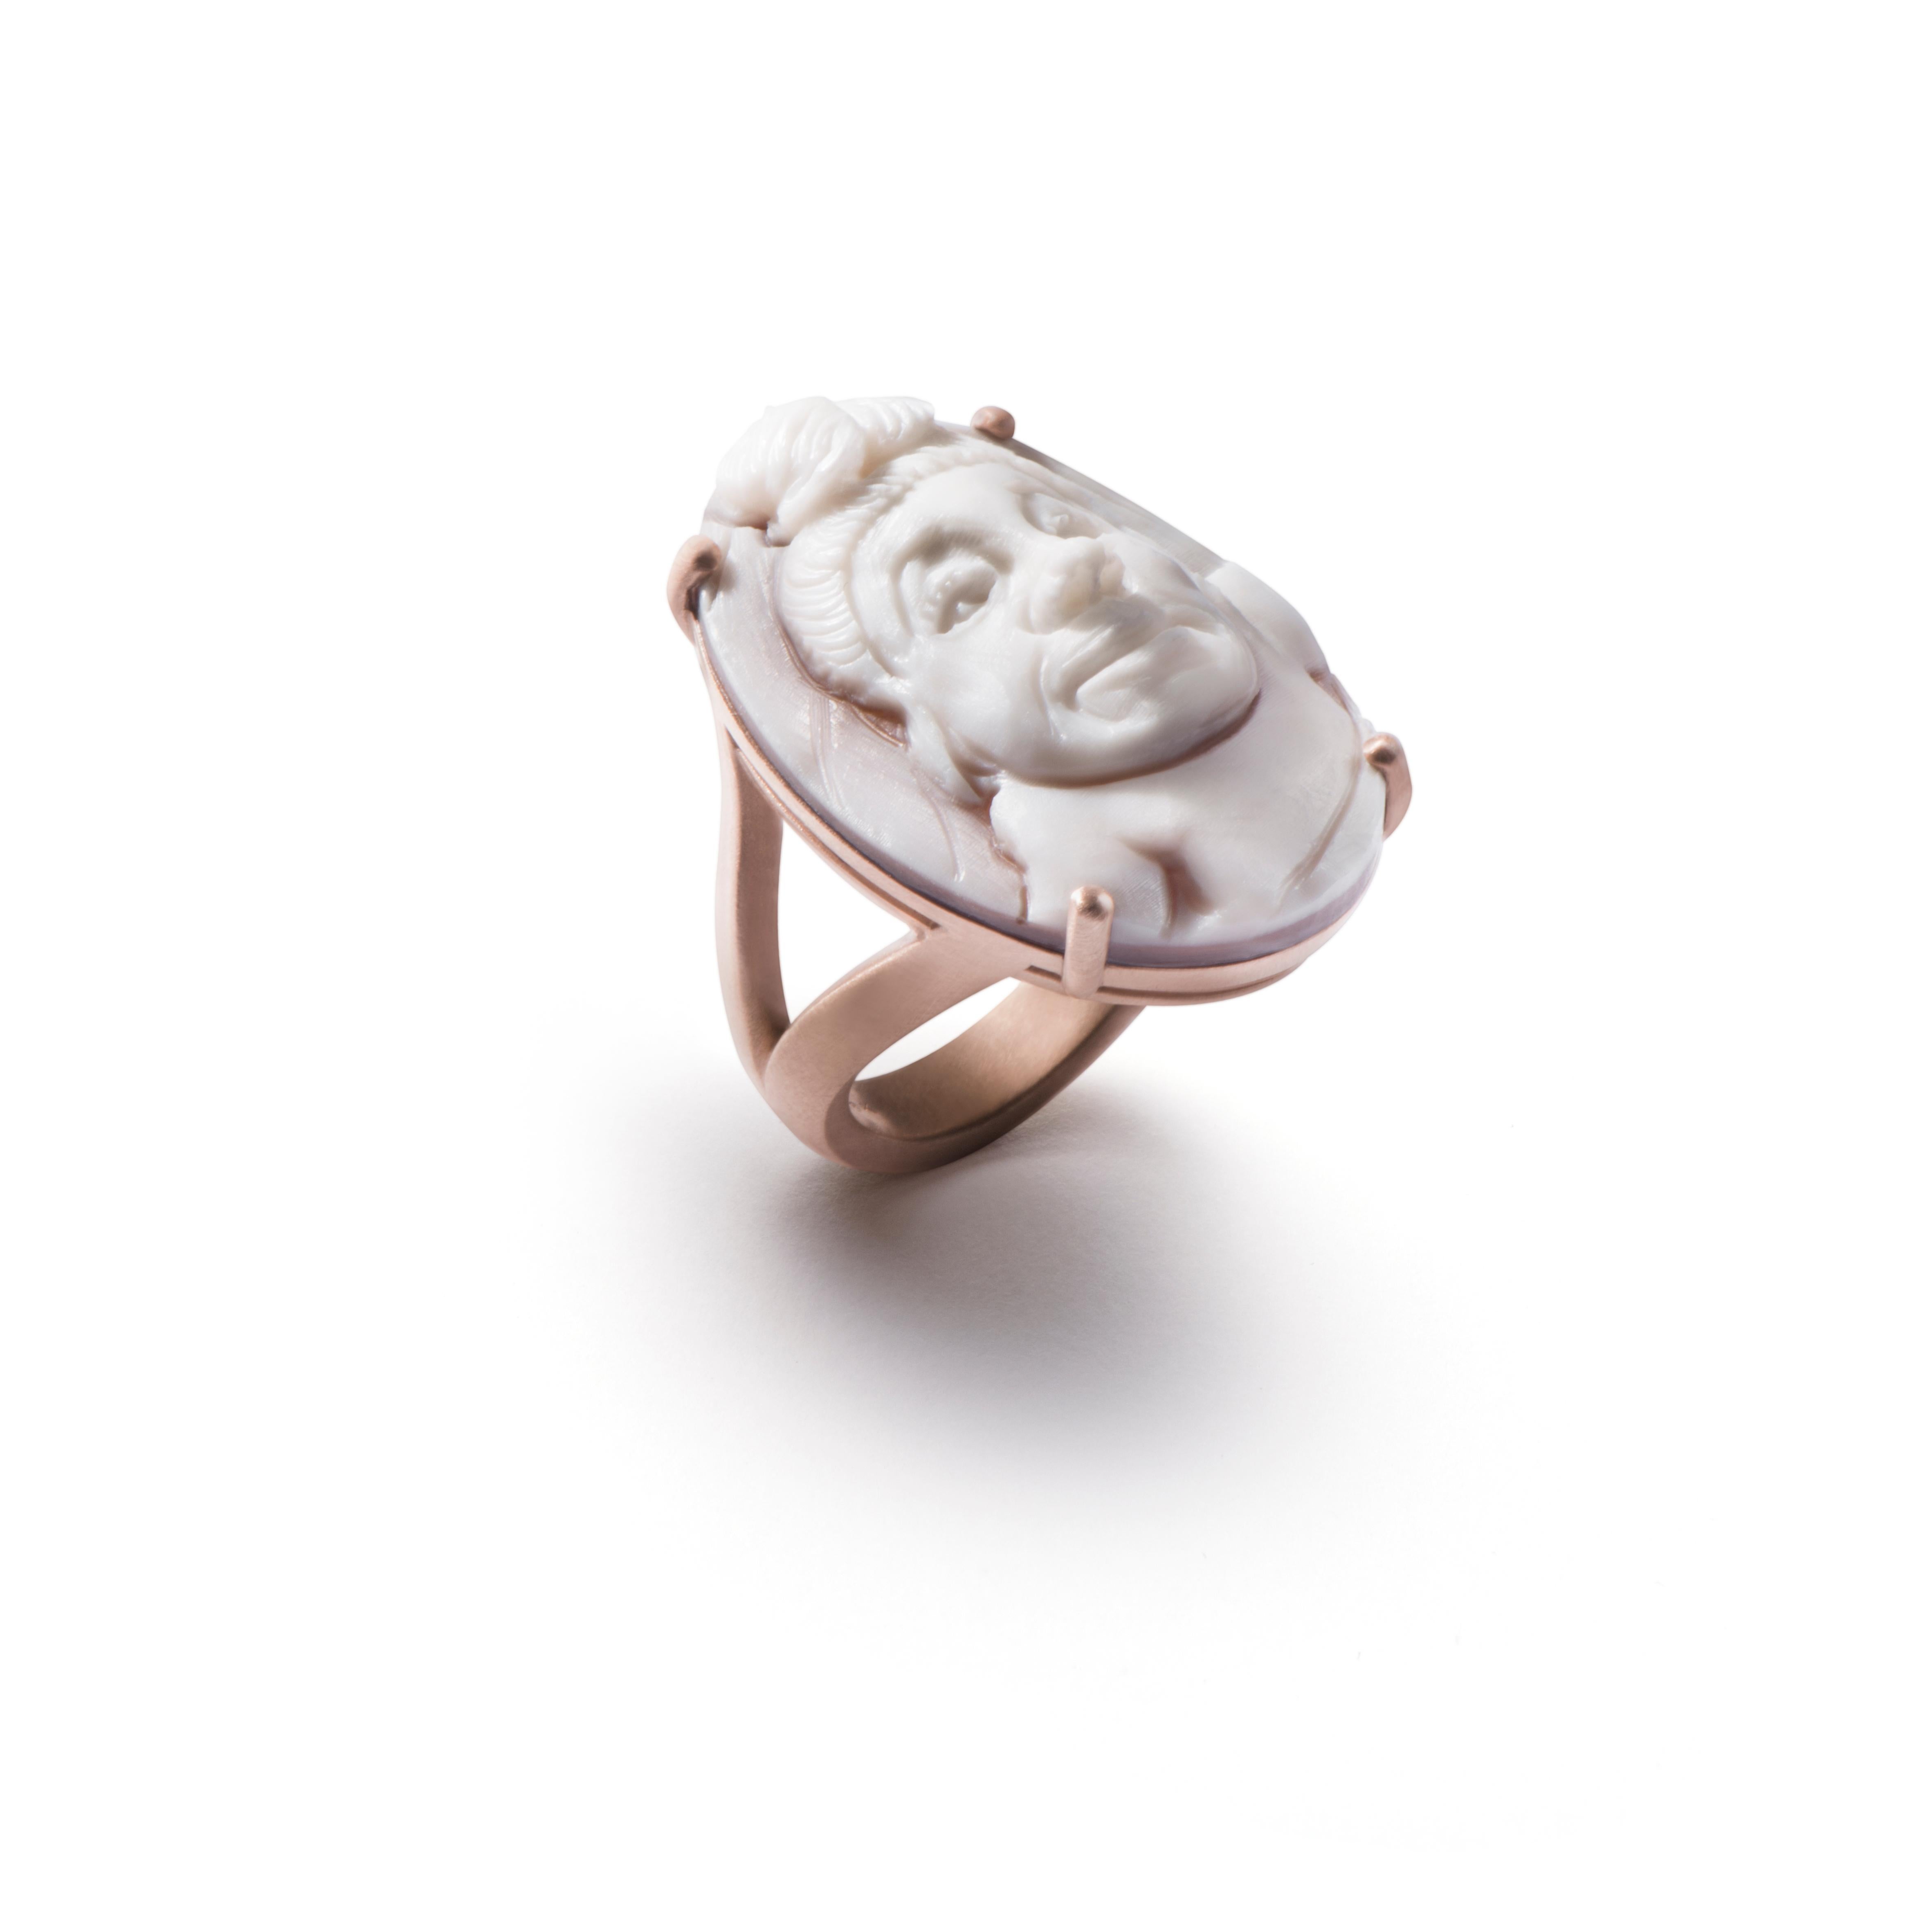 Italian Baby Hand-Carved Cameo Ring in Sardonyx Shell & 18-Karat Gold by Cindy Sherman  For Sale